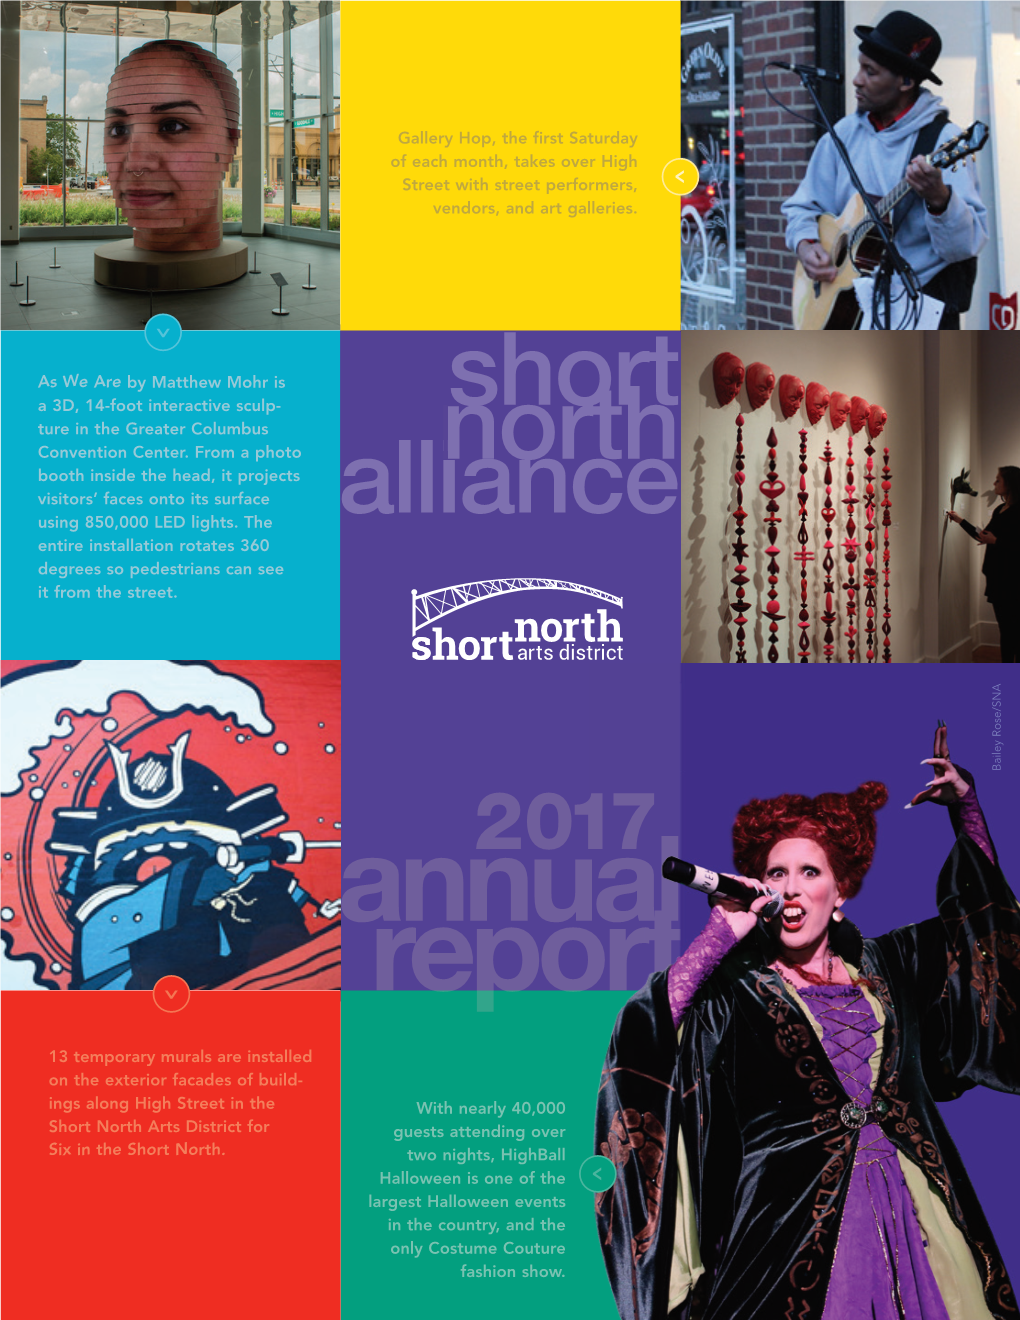 Short North Alliance Letter from the Executive Director